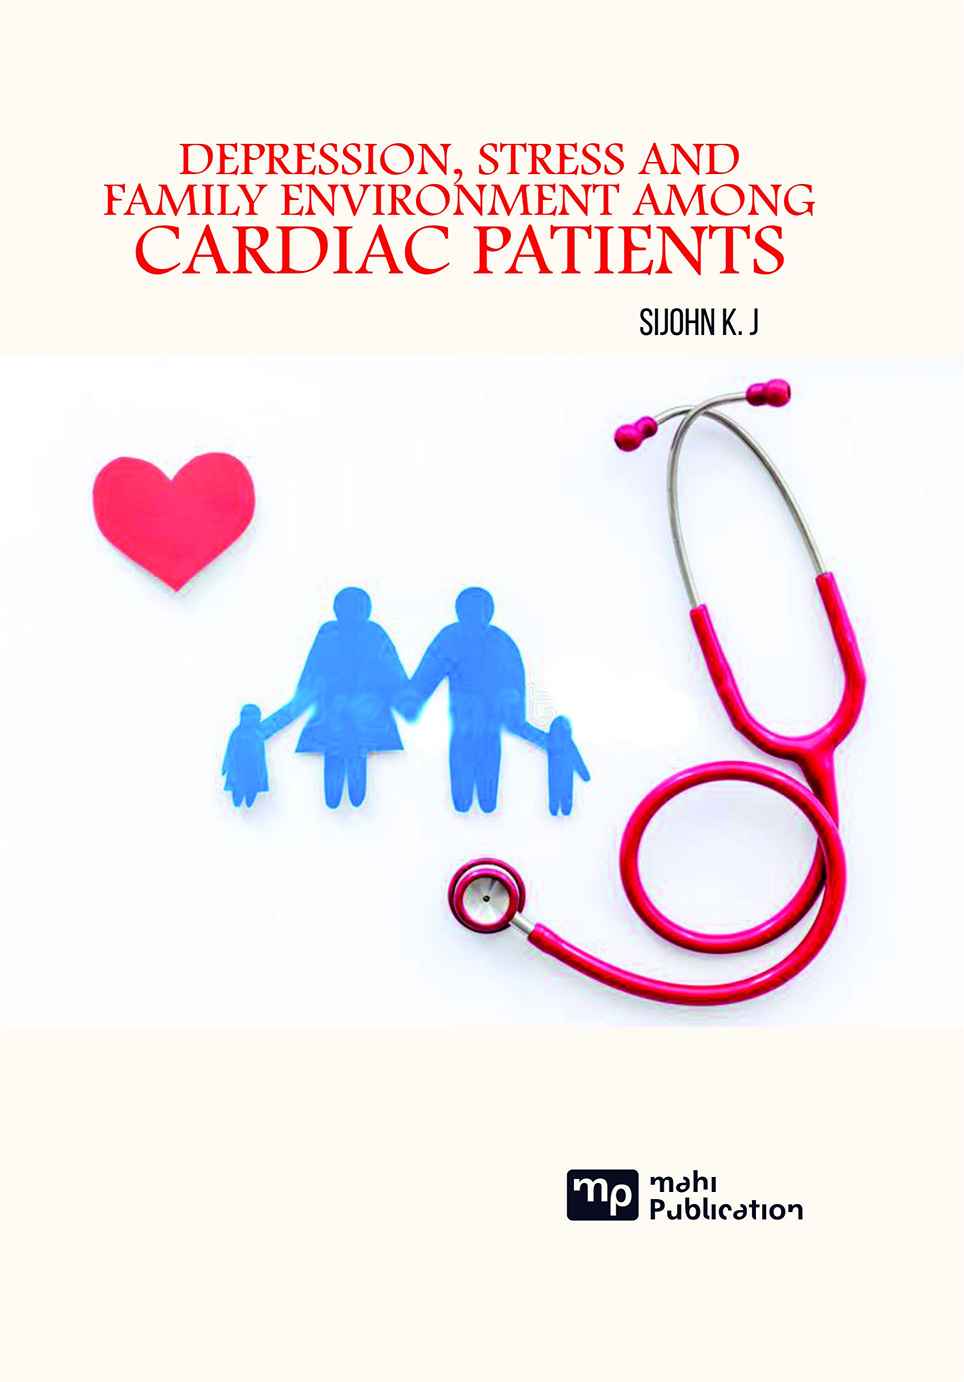 Depression, Stress and Family Environment Among Cardiac Patients